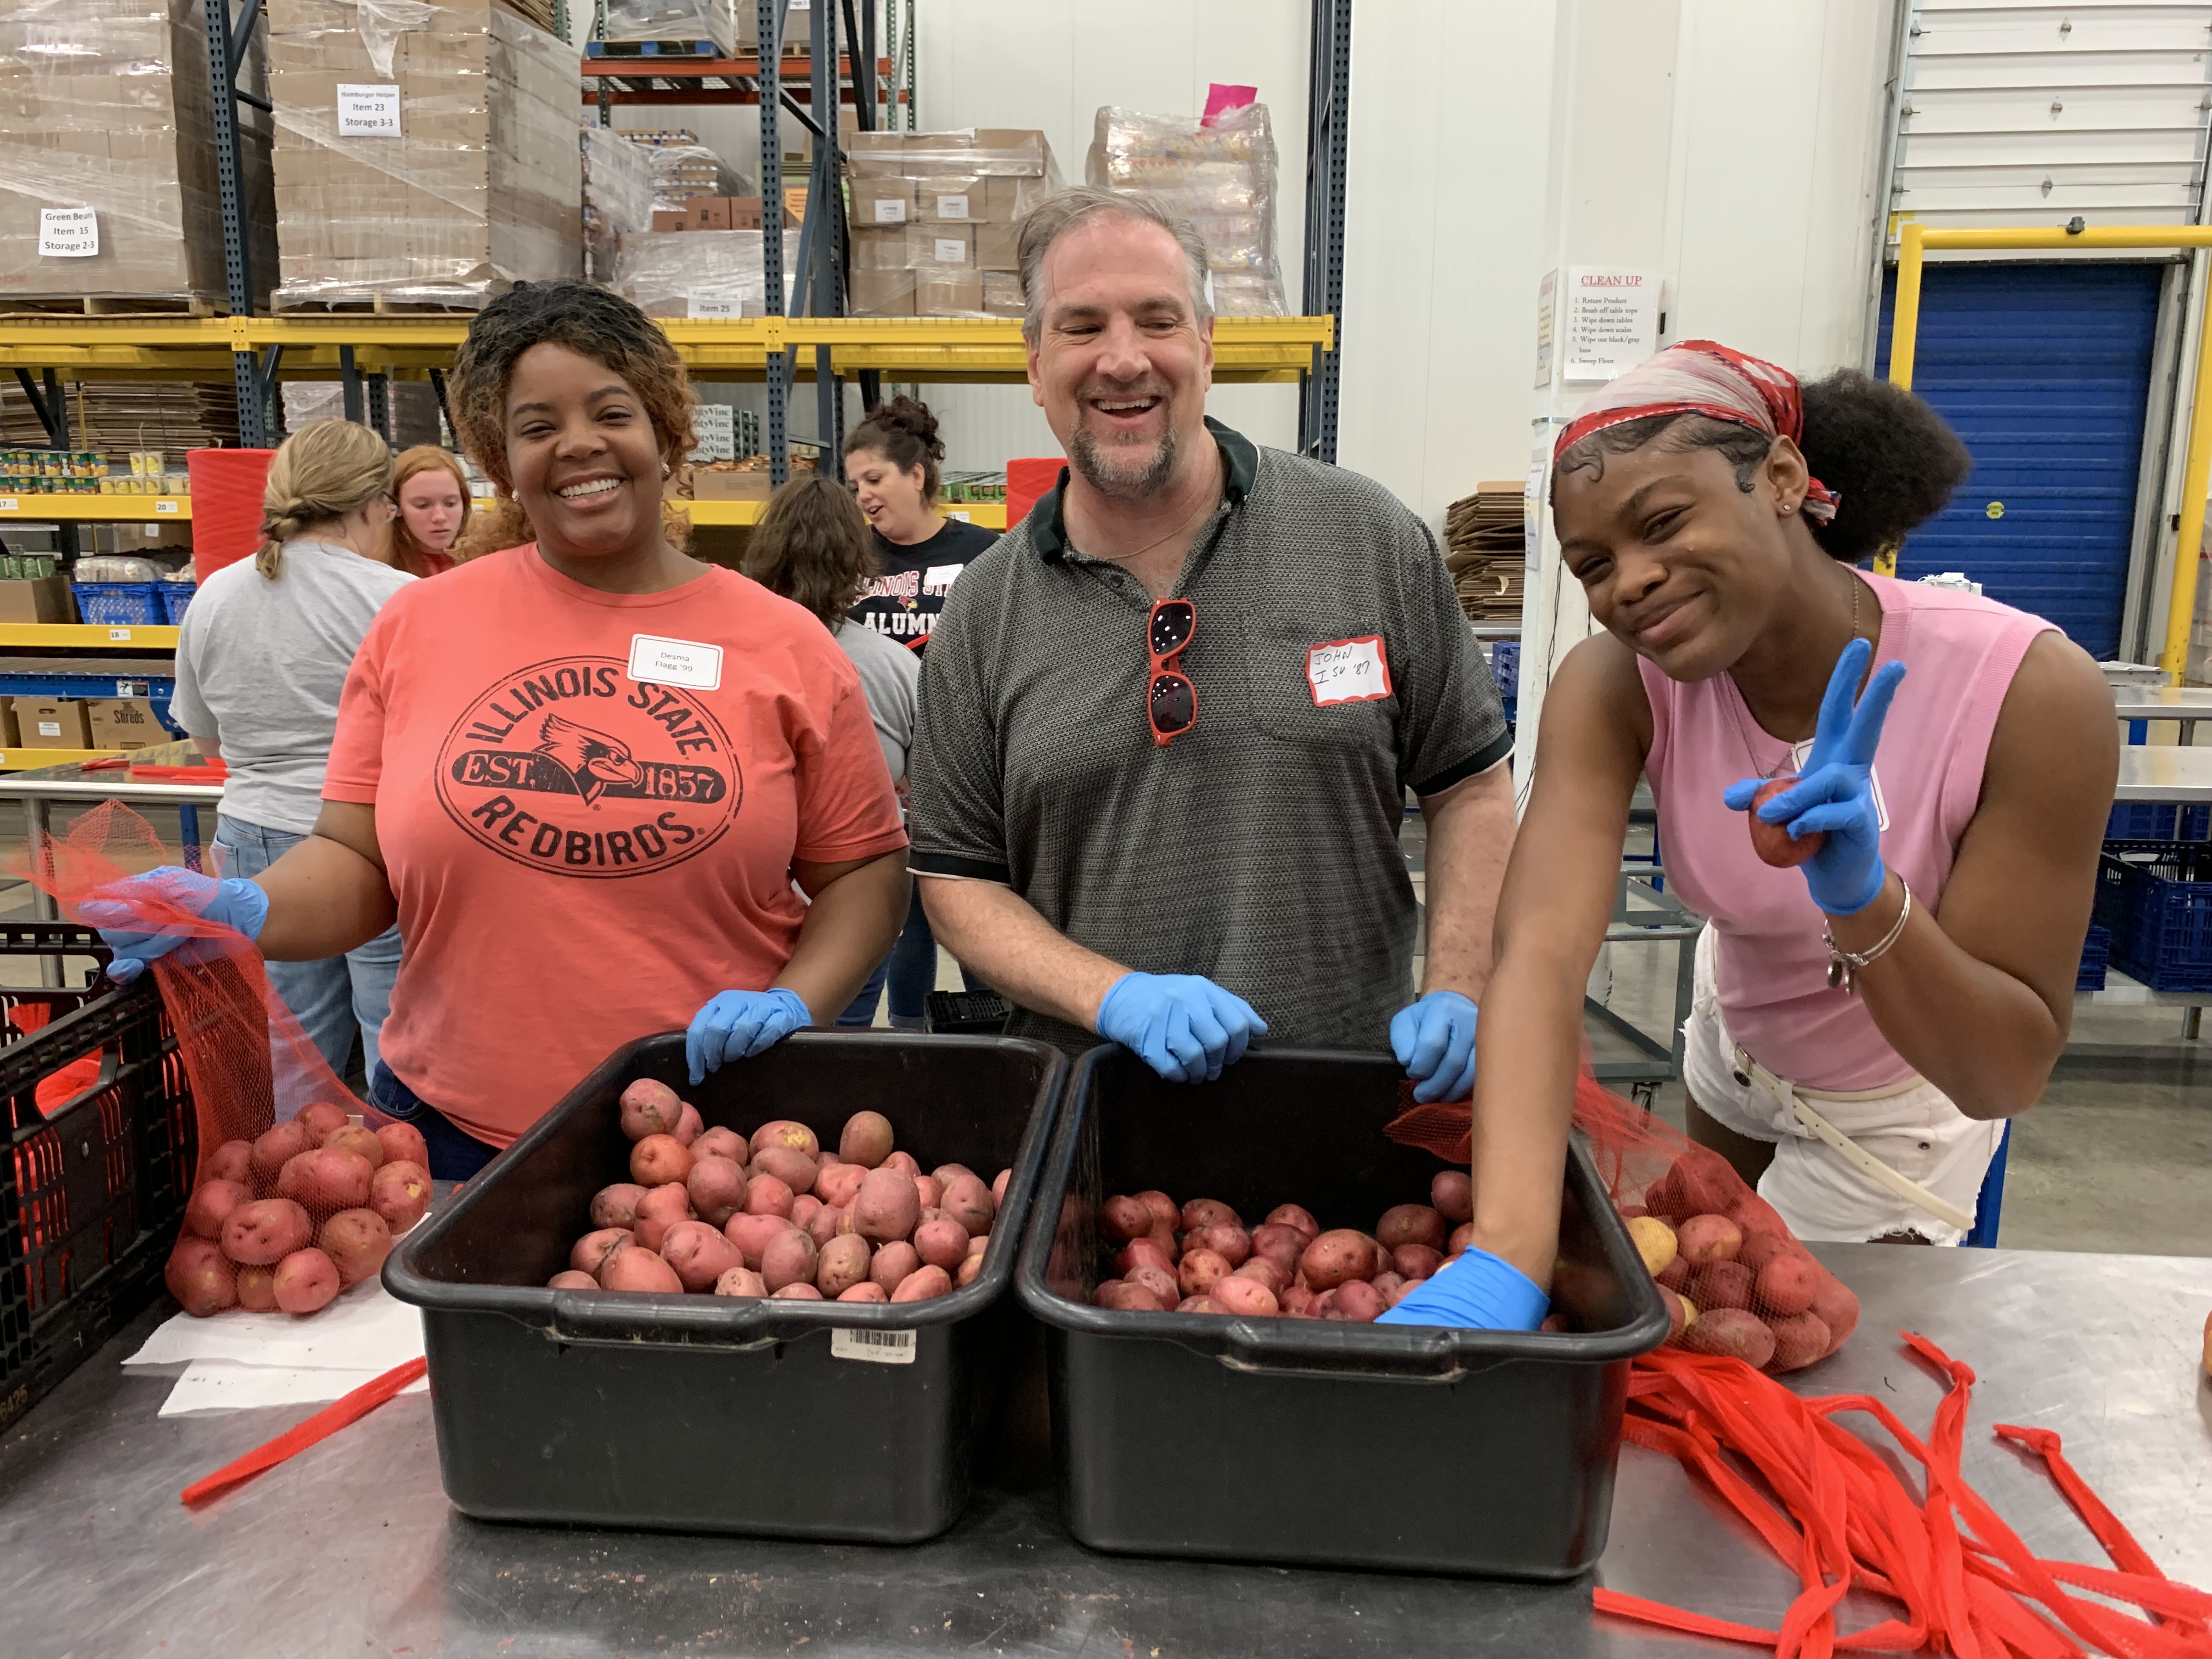 Members of the Chicago Suburban Alumni Network volunteered at the Northern Illinois Food Bank as part of #RedbirdImpact Month.